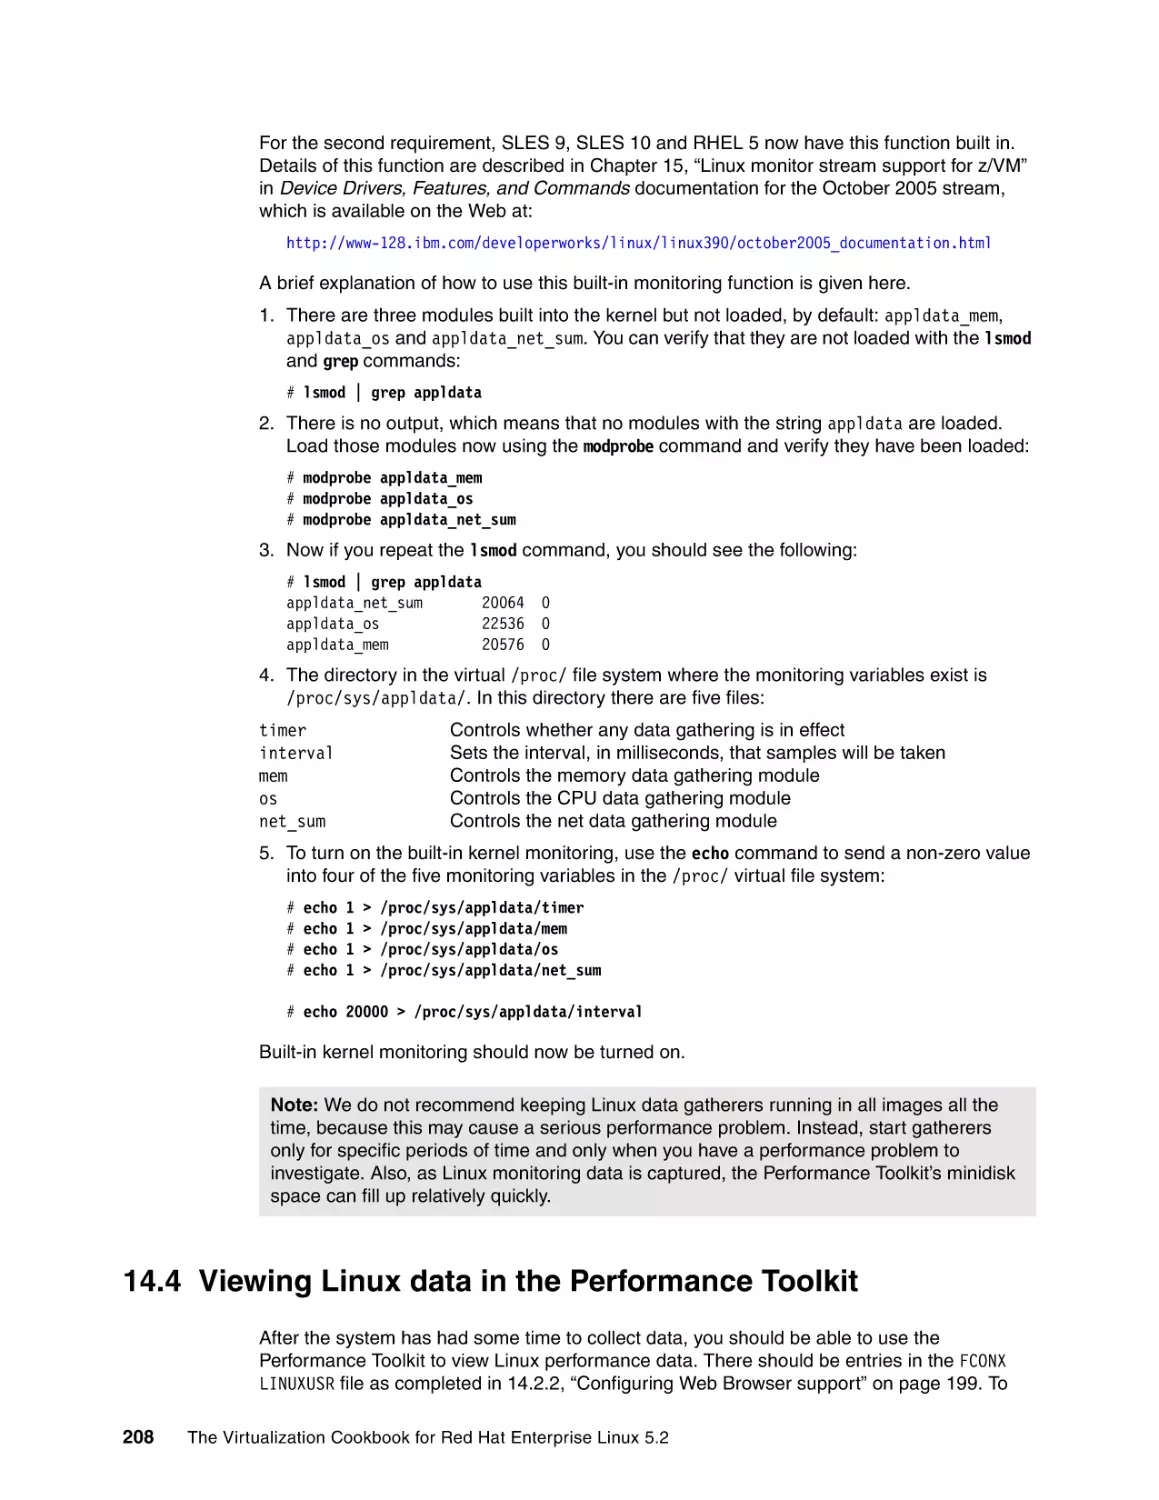 14.4 Viewing Linux data in the Performance Toolkit